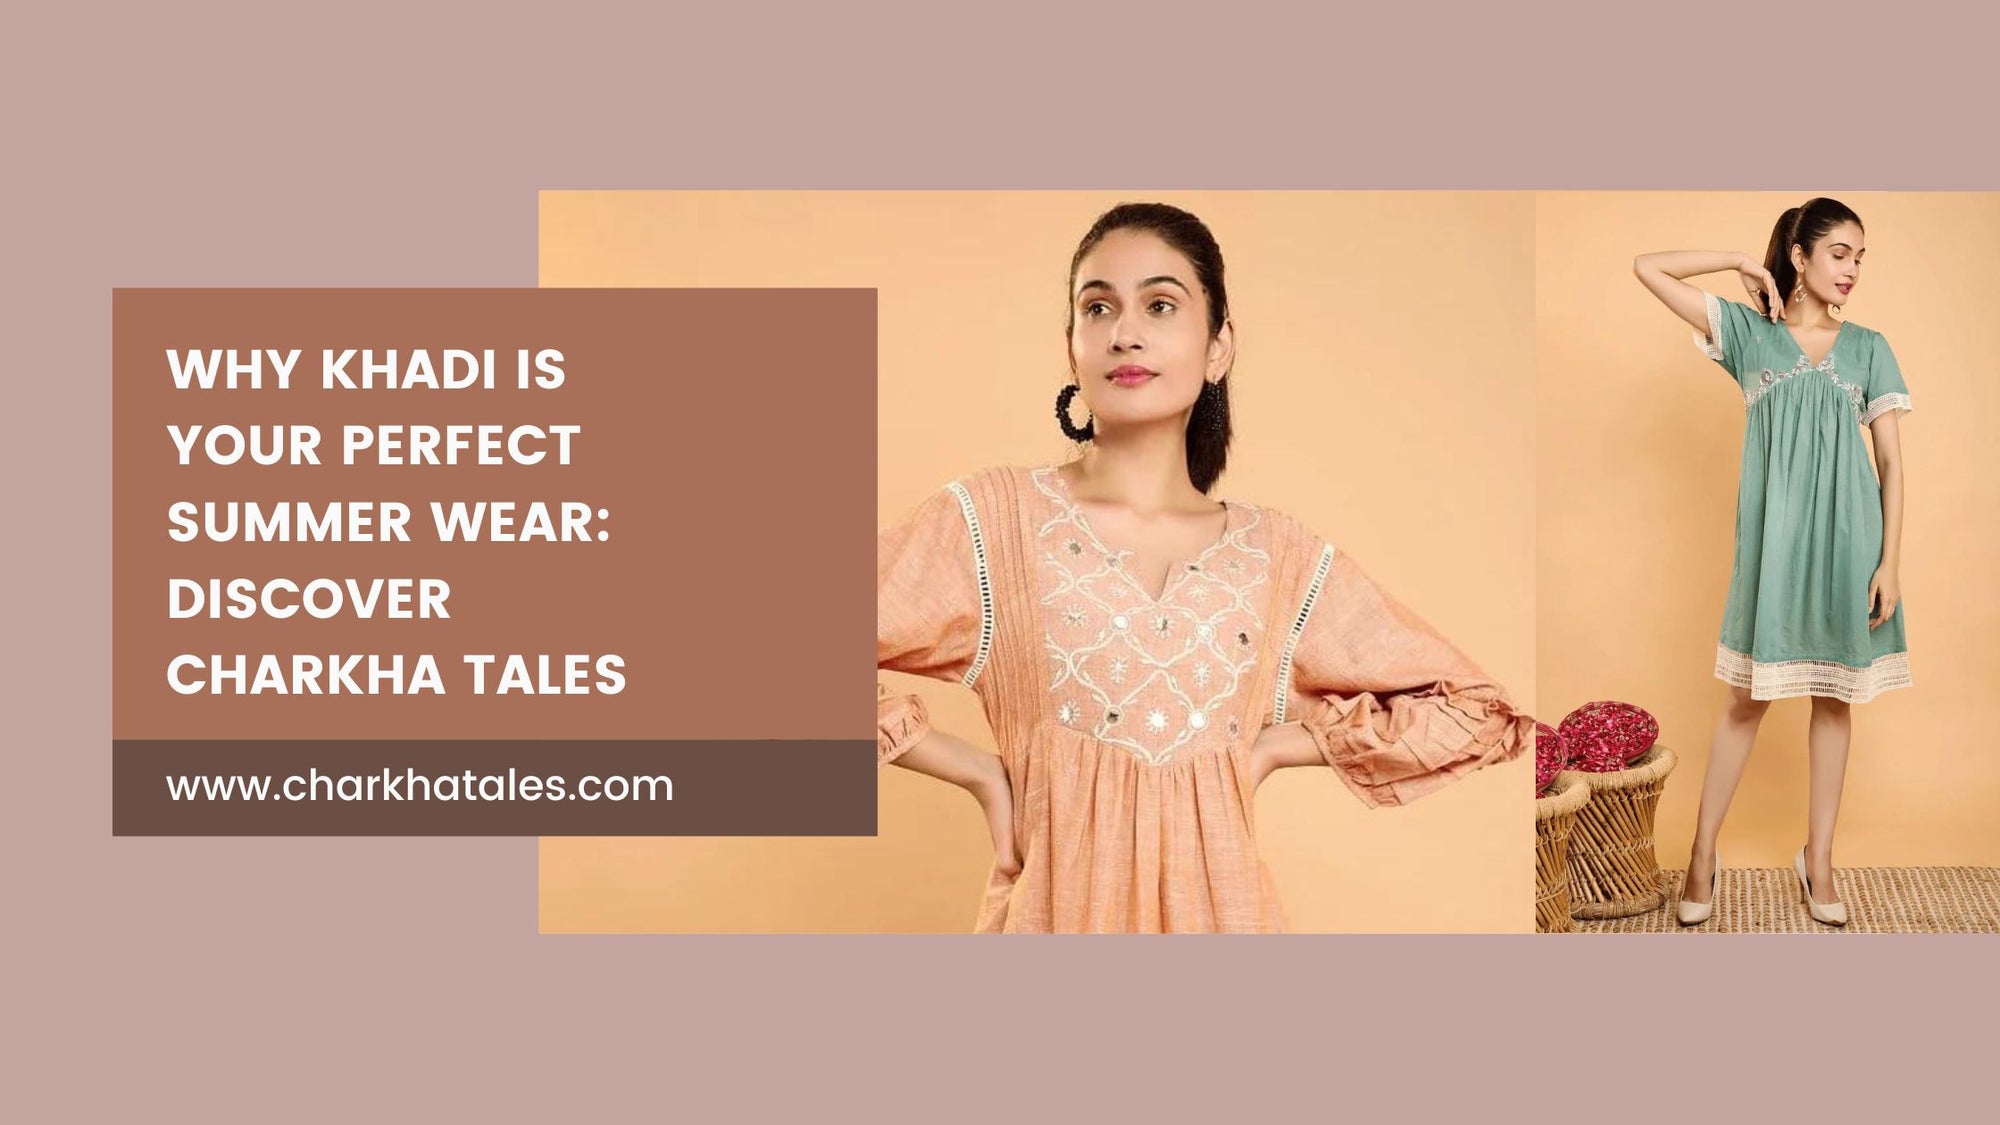 Why Khadi is Your Perfect Summer Wear: Discover Charkha Tales